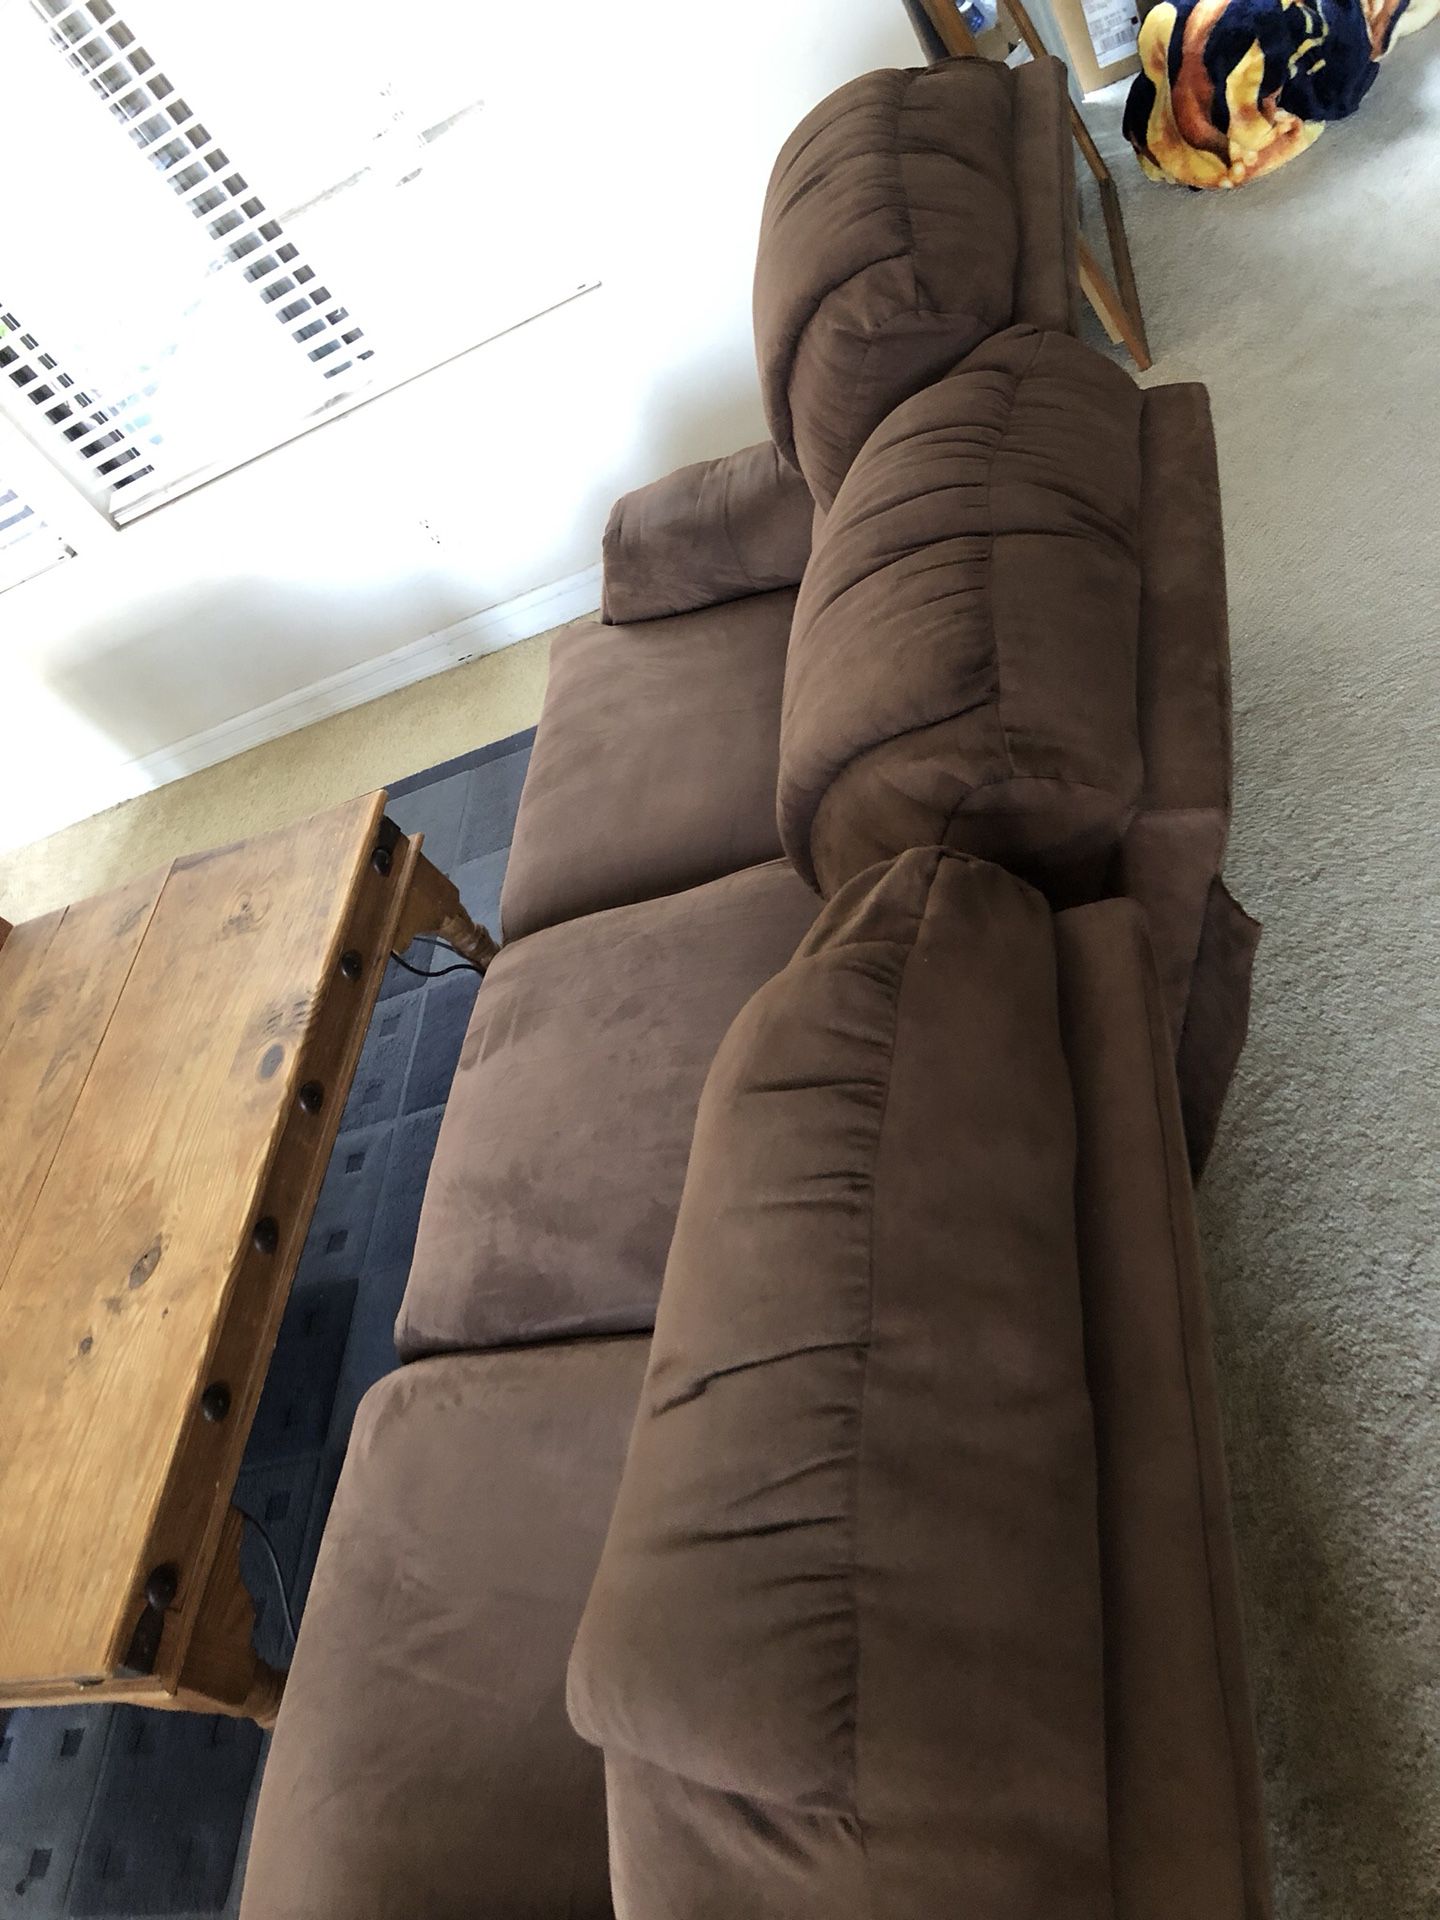 FREE microfiber couch, (pickup ASAP). Middle cushion slightly broke and leans back. You can still sit there.